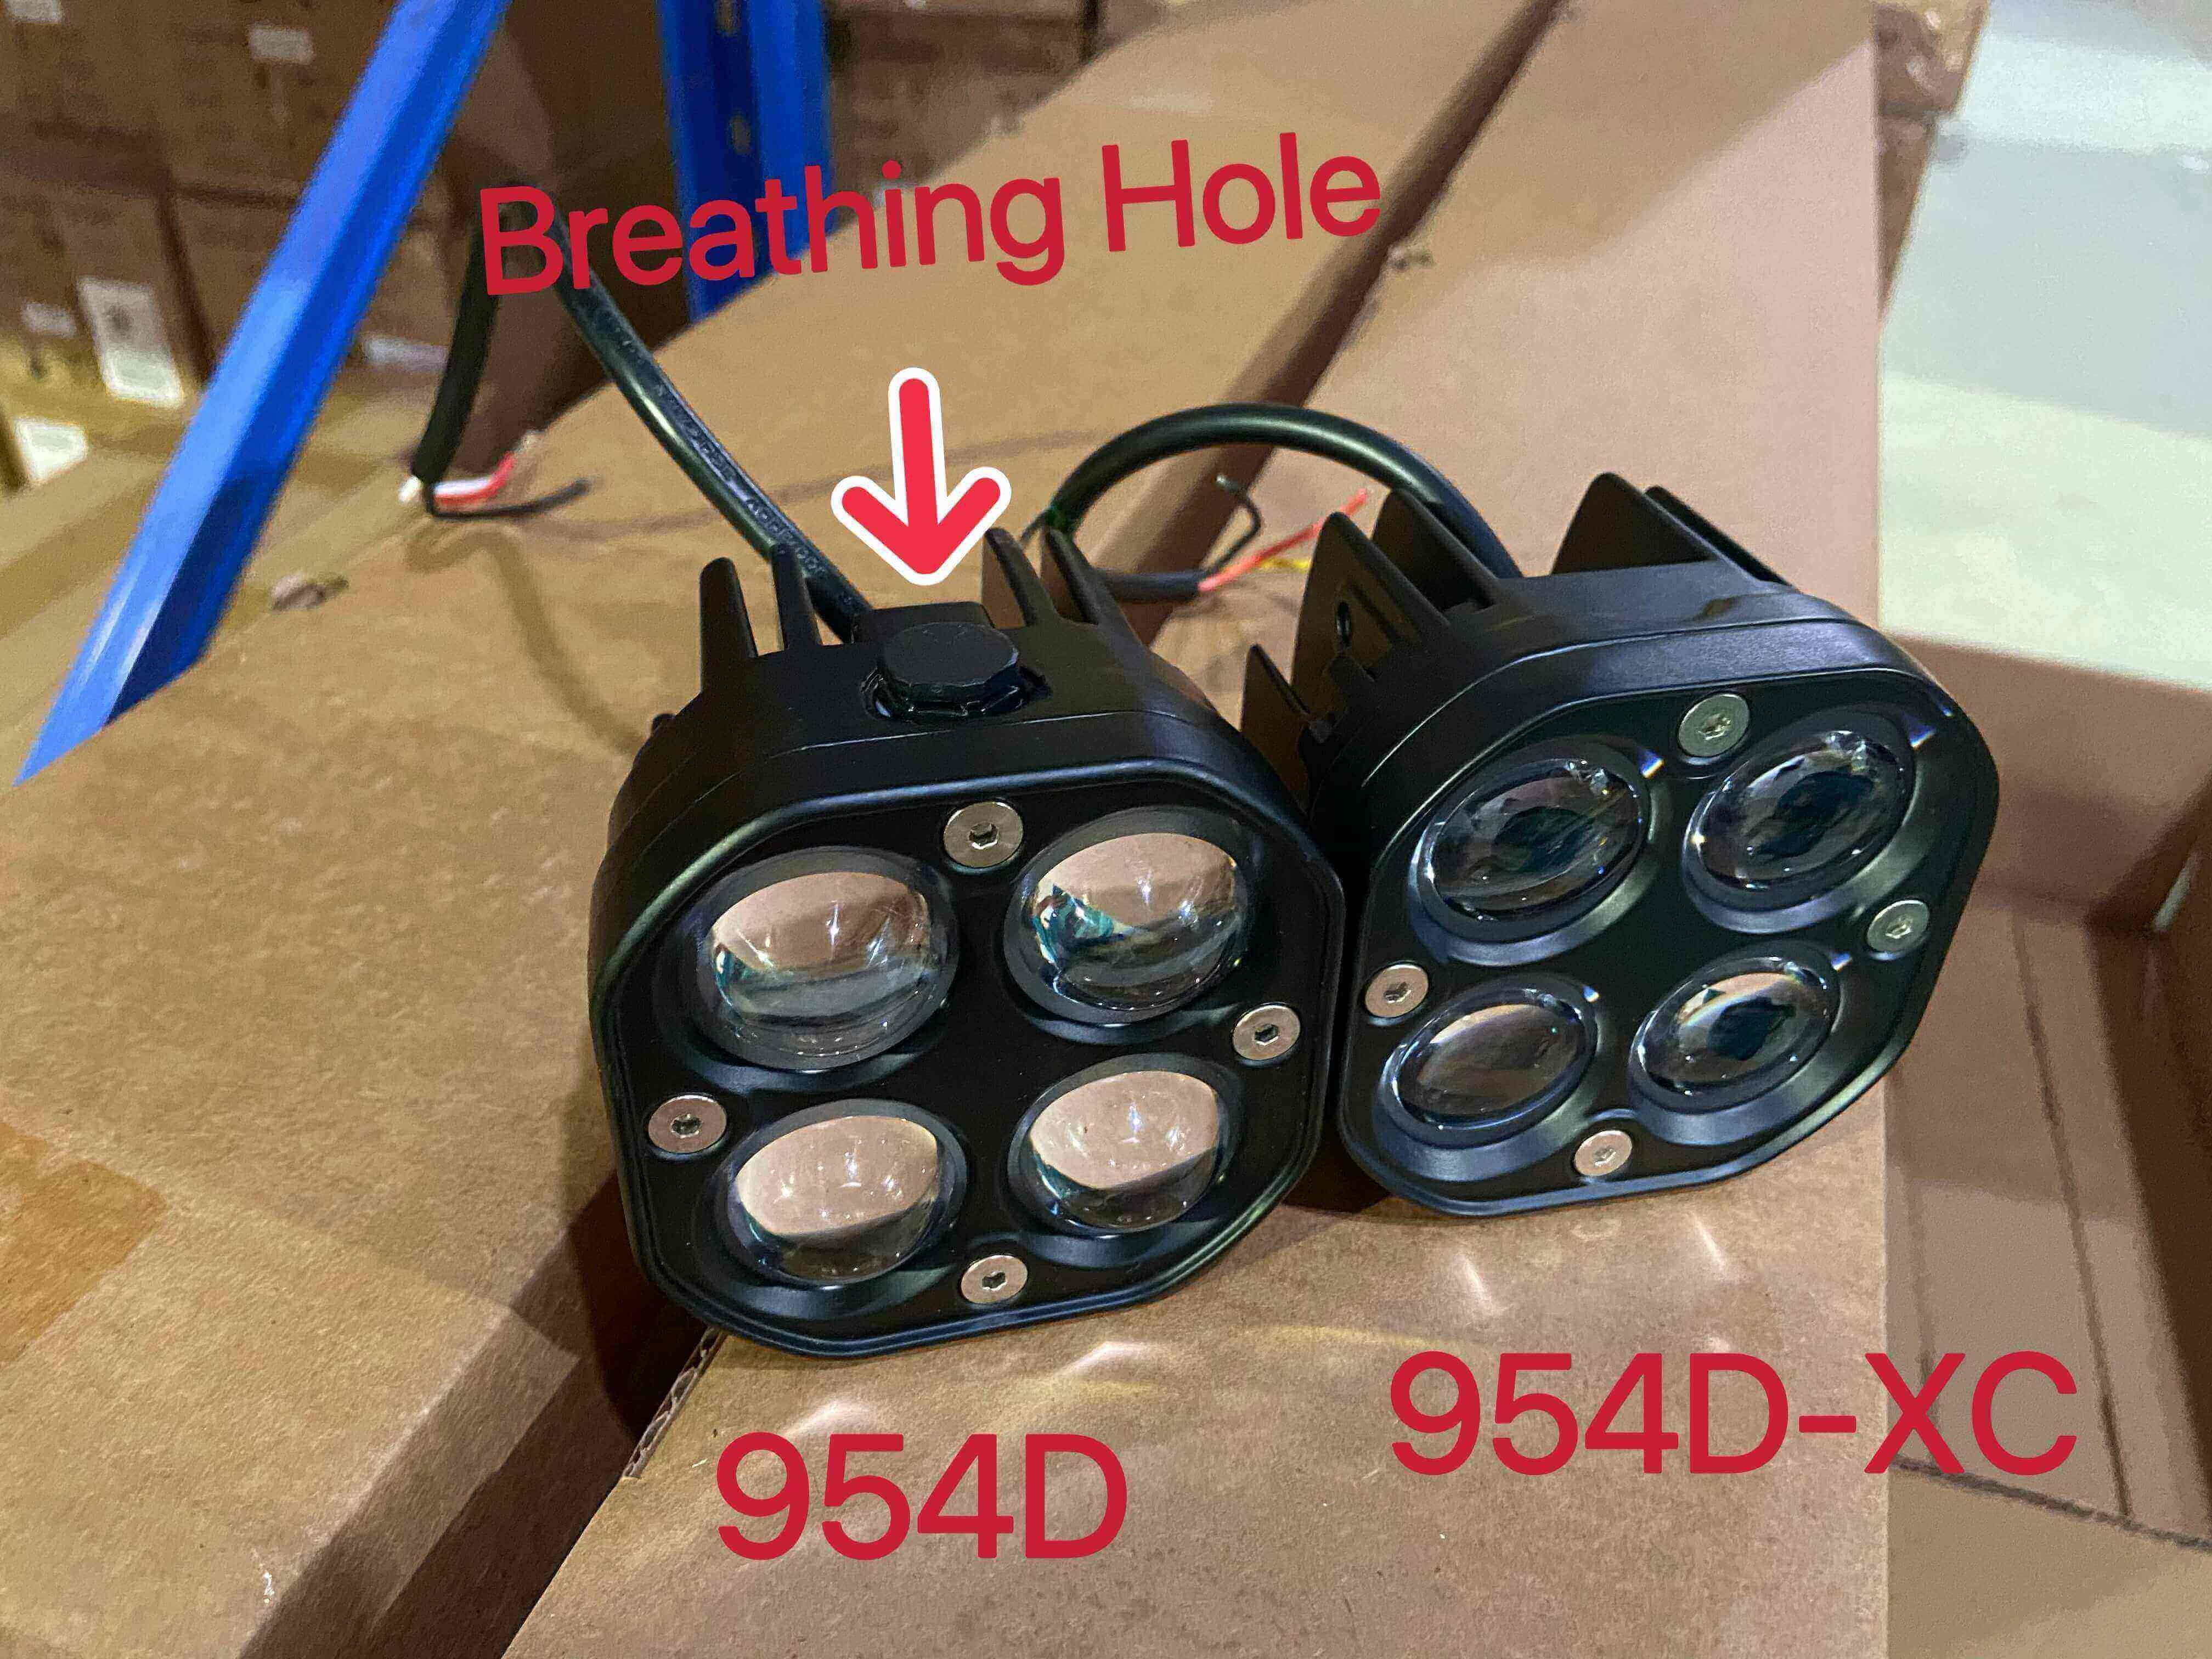 How to Tell the Difference Between Quality Projector Ditch Lights&Cheap Projector Ditch Lights BH